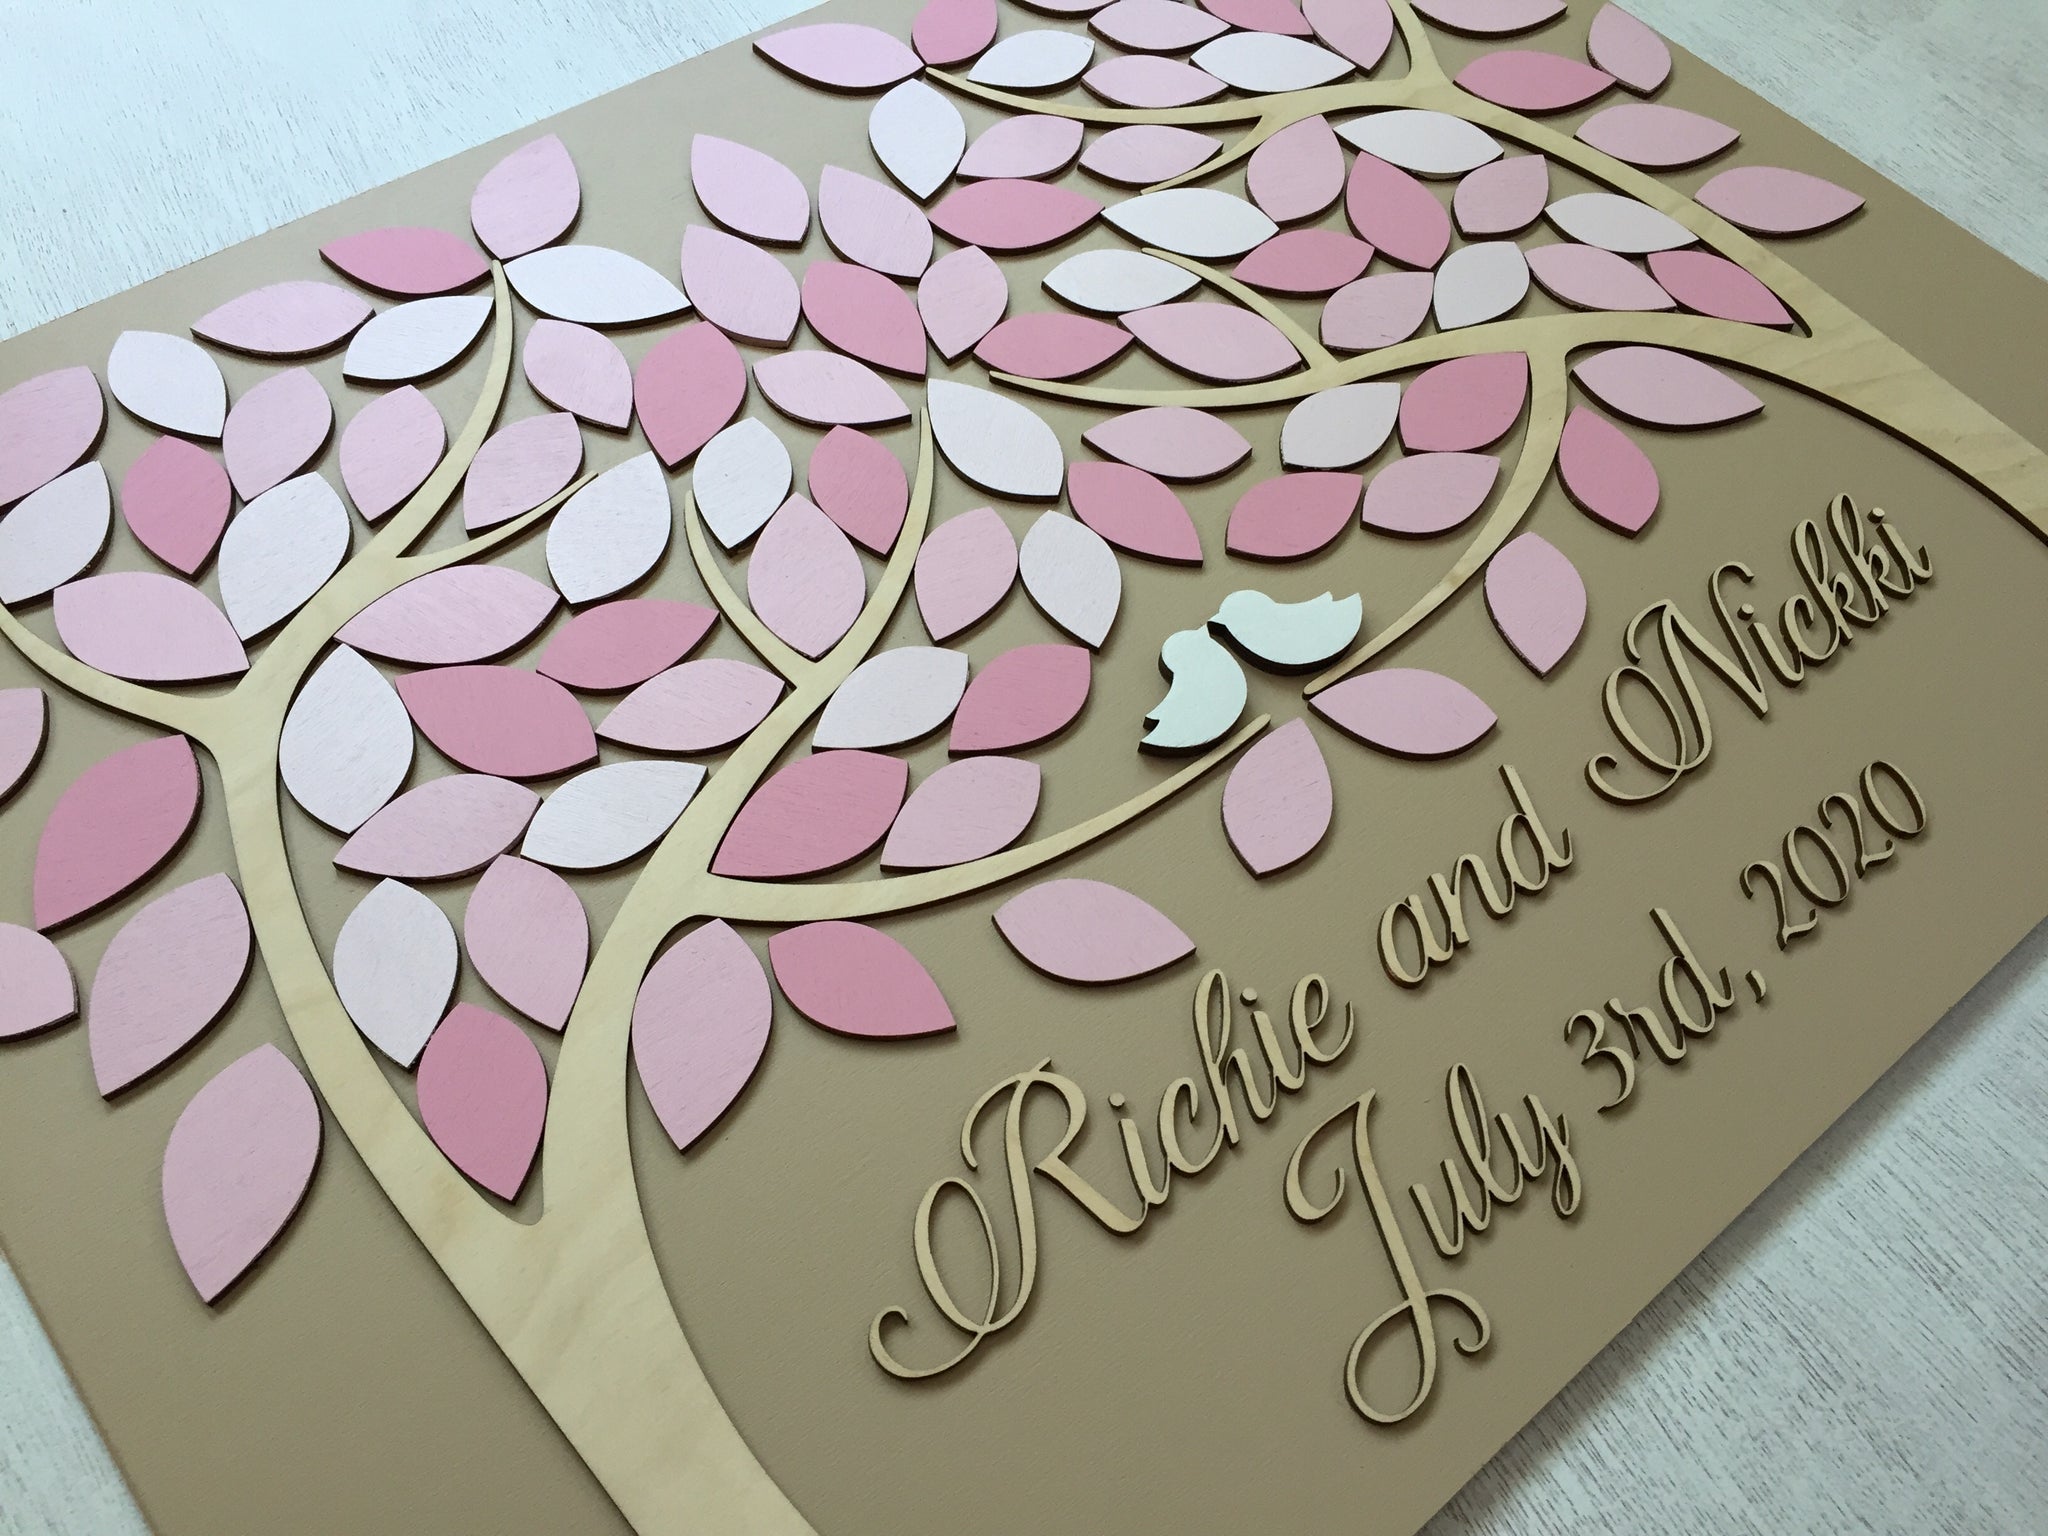 Personalized tree of life guest book alternative for wedding, virtual wedding or anniversary on pink color scheme. The leaves can be sent unattached for virtual wedding attendees